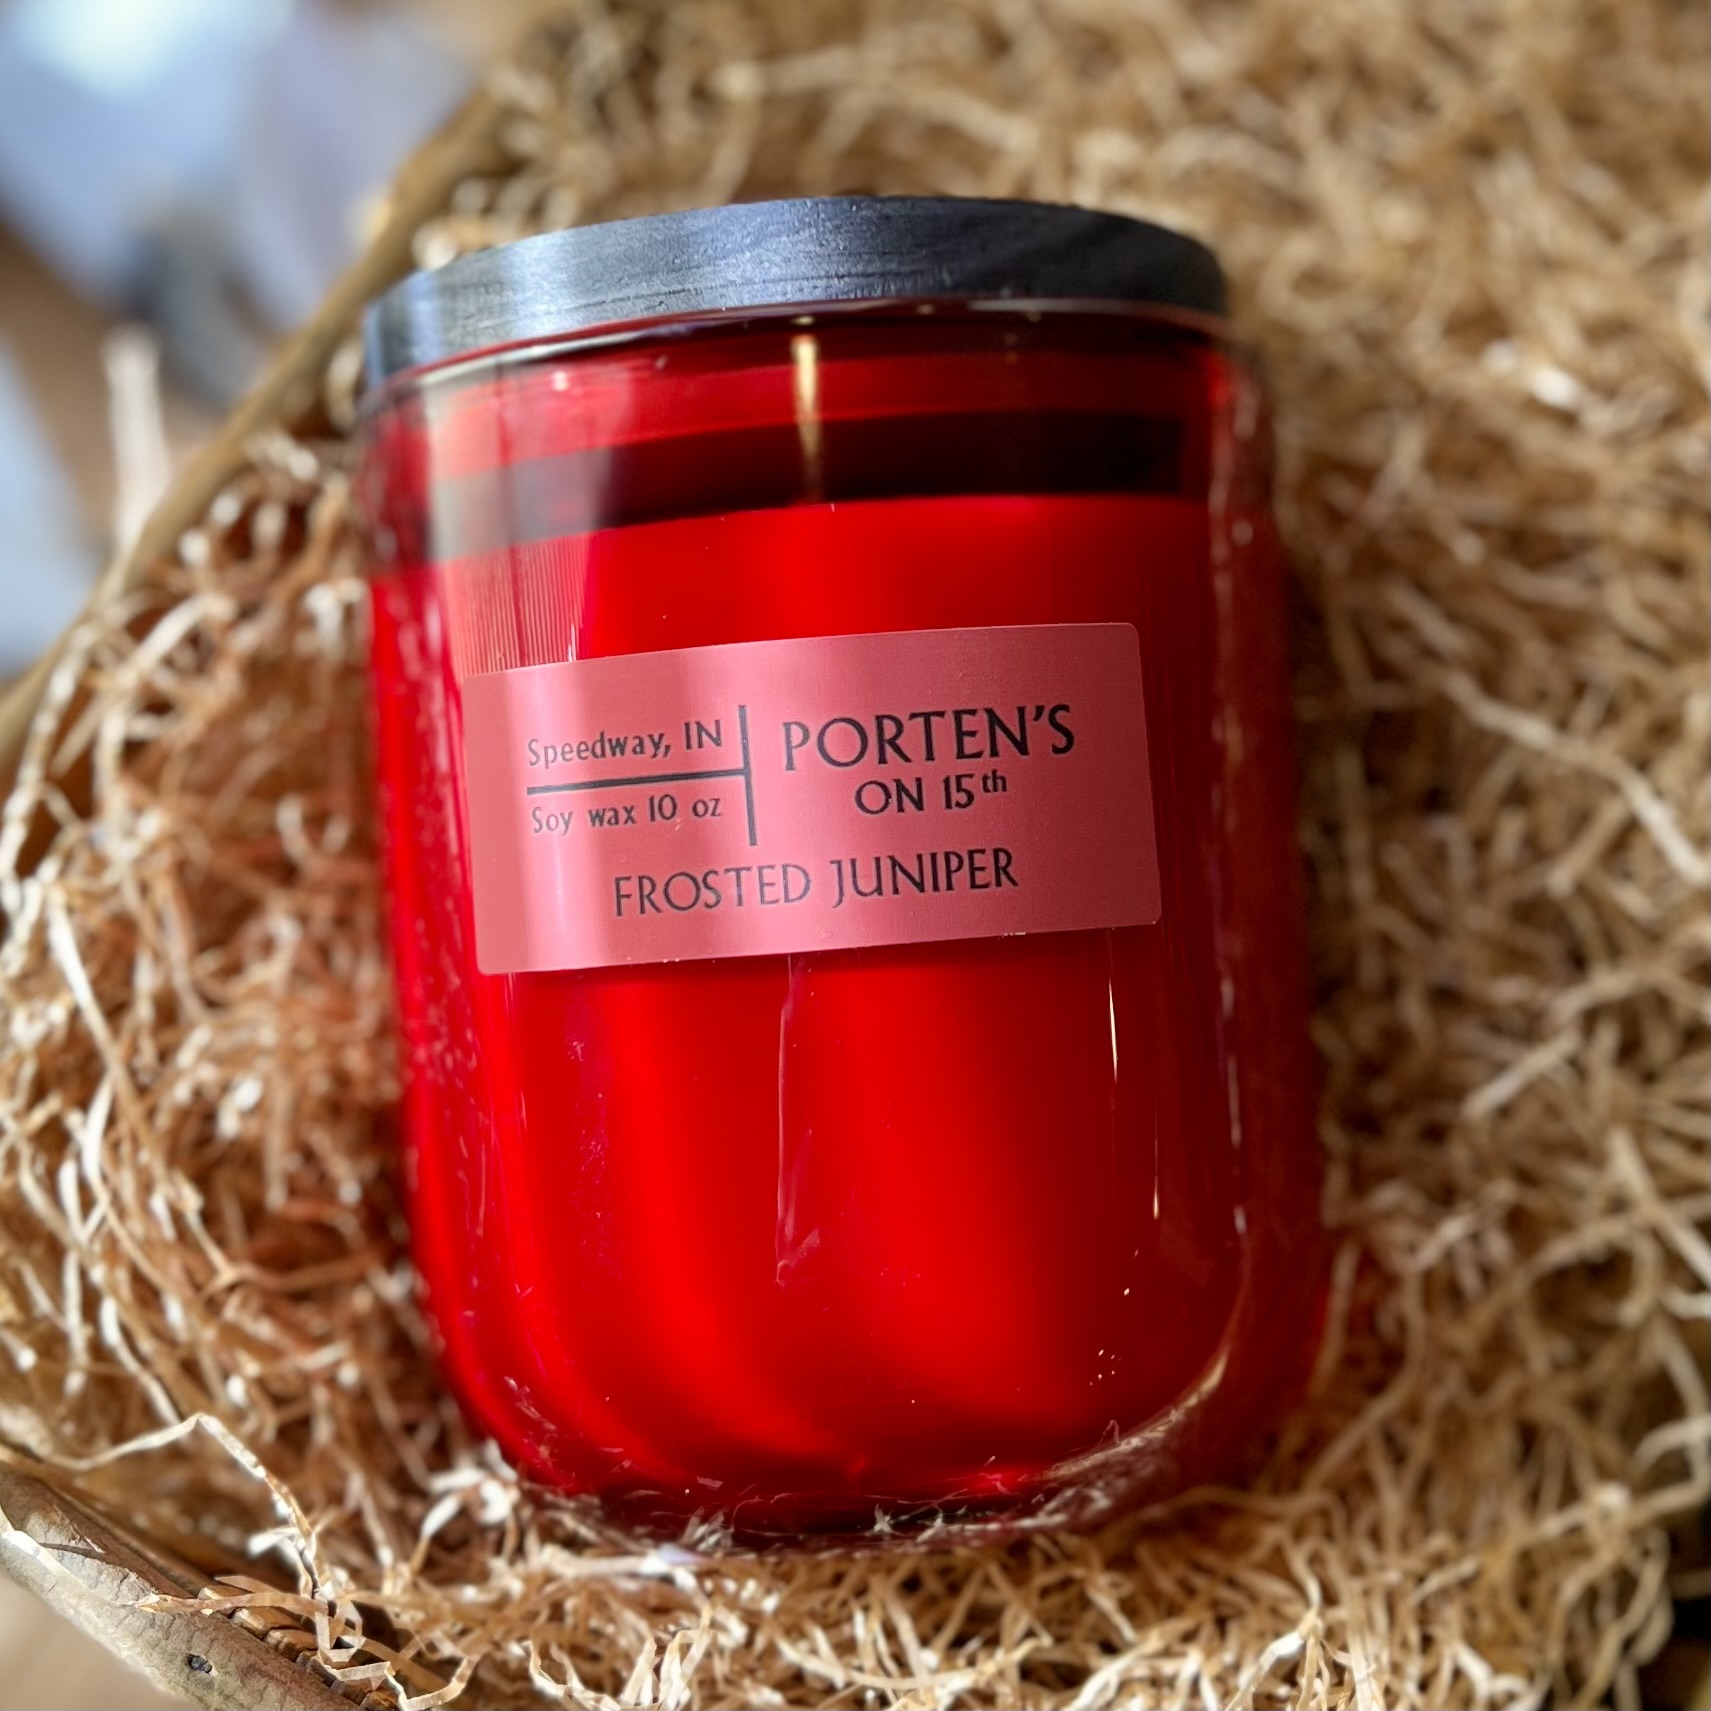 Porten's on 15th Candle Company's soy wax candle in the scent Frosted Juniper sits in a woven basket full of brown crinkle paper.